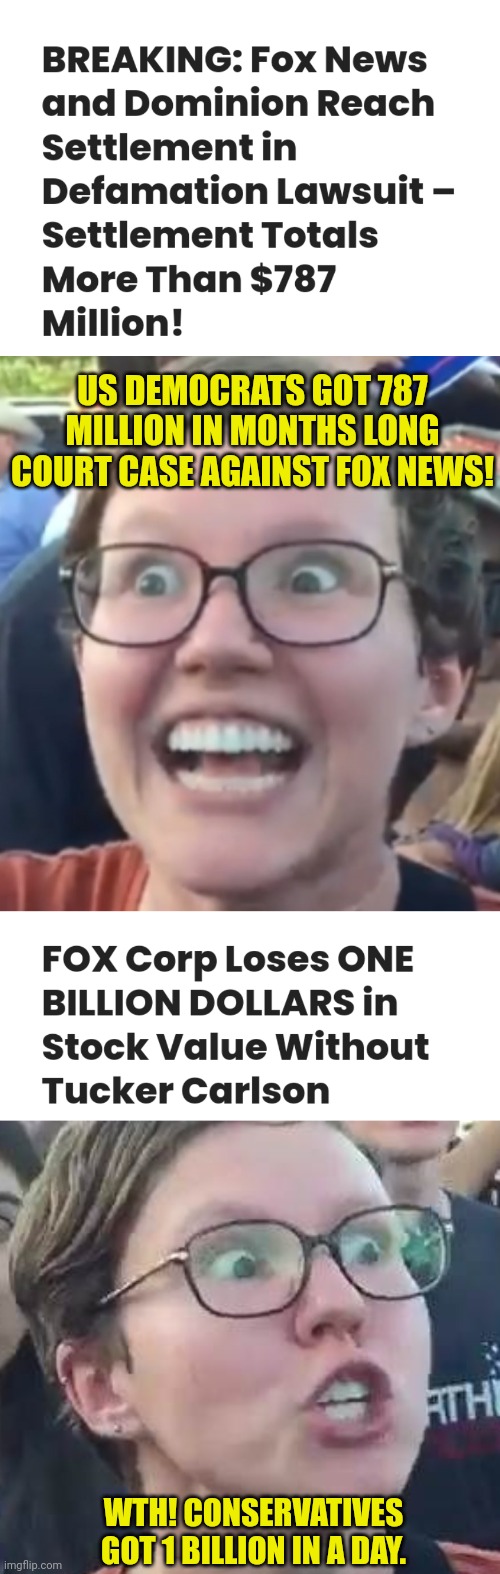 American Conservatives Showing democrat commies How it's done | US DEMOCRATS GOT 787 MILLION IN MONTHS LONG COURT CASE AGAINST FOX NEWS! WTH! CONSERVATIVES GOT 1 BILLION IN A DAY. | image tagged in sjw happy then triggered,fox news,conservatives,boycott,democrat,commies | made w/ Imgflip meme maker